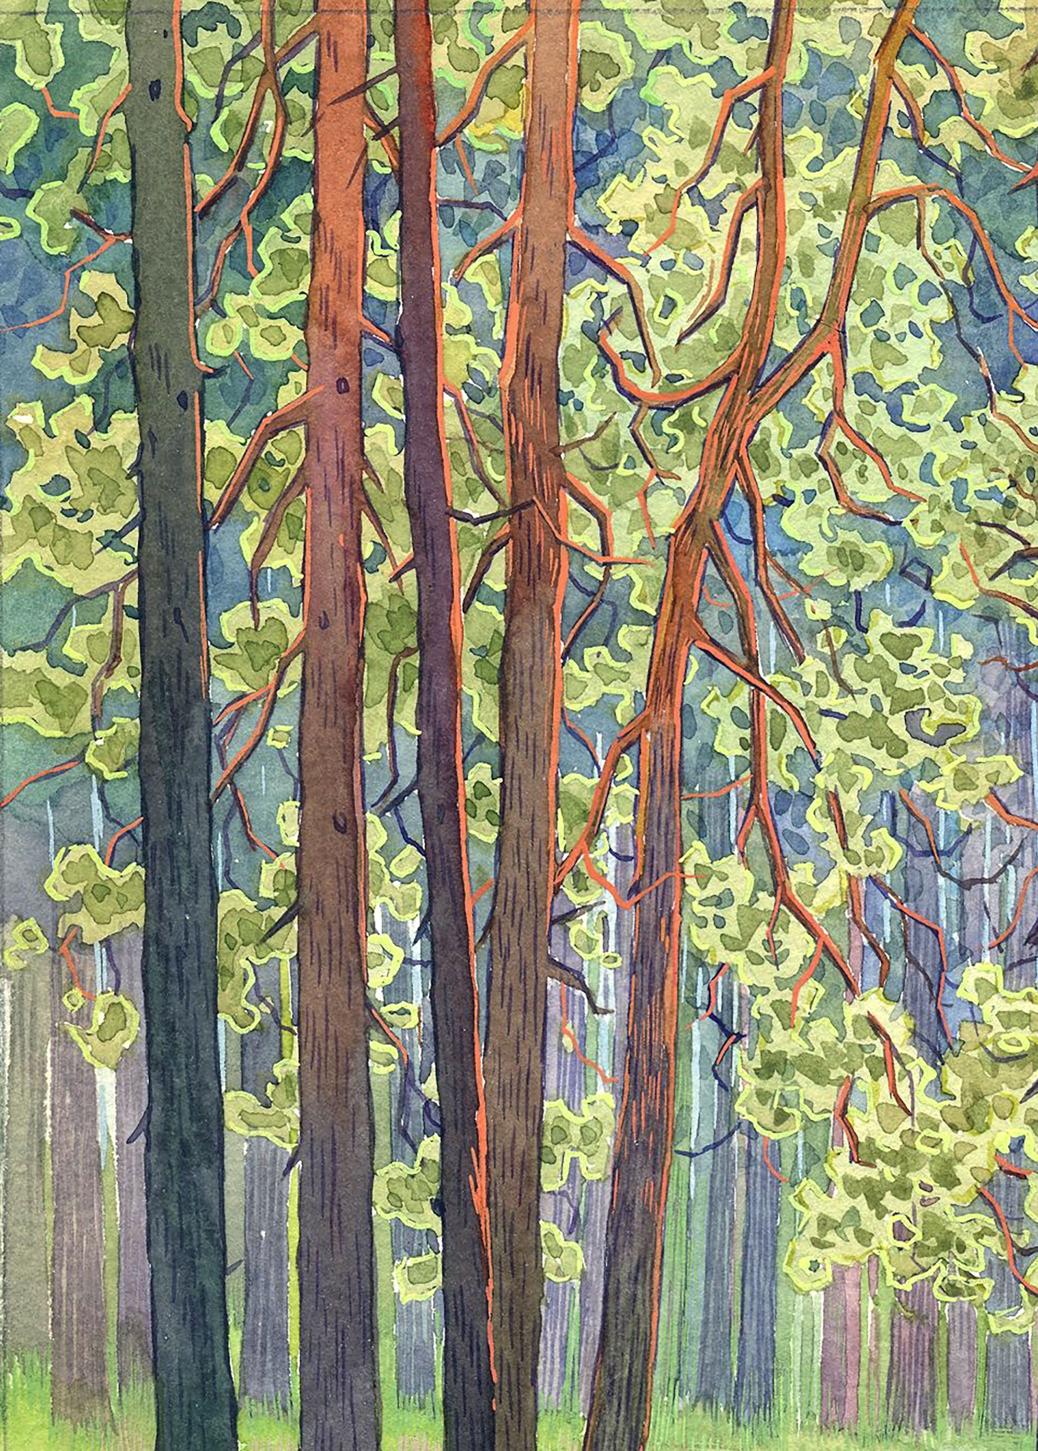 Watercolor painting In the green forest Savenets Valery